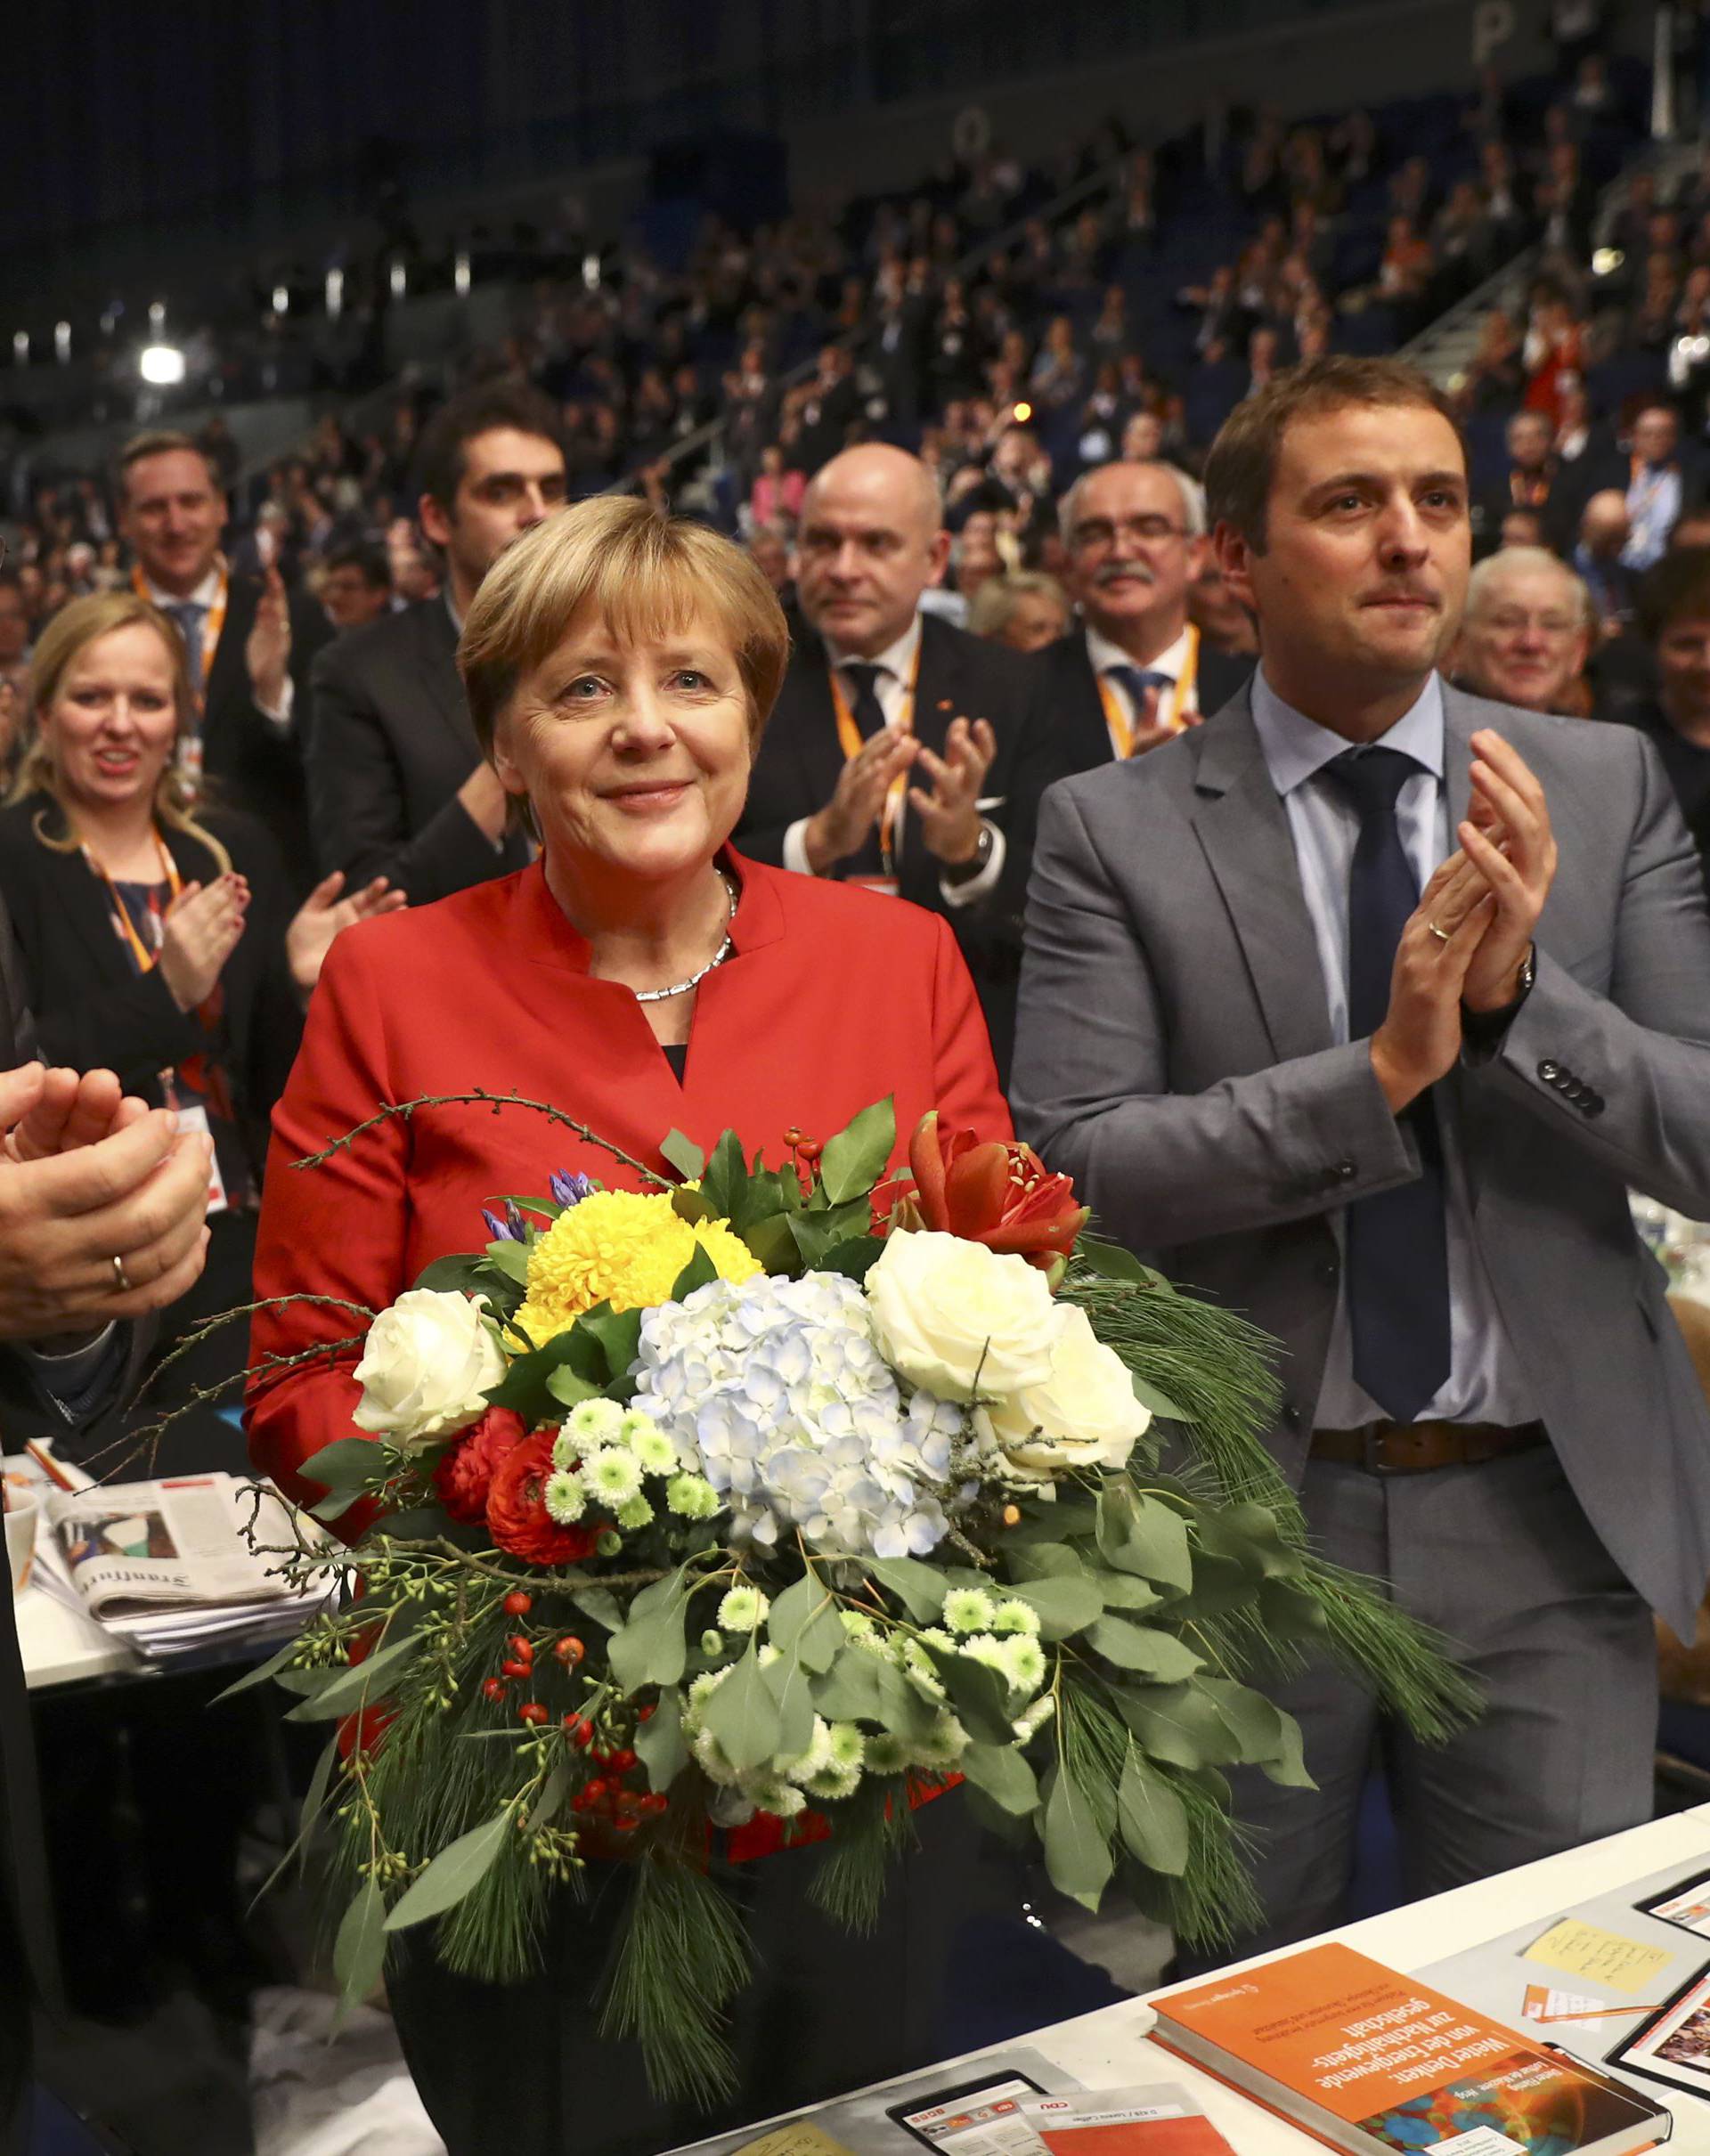 German Chancellor and leader of the conservative CDU Merkel reacts after she was re-elected as chairwoman at the CDU party convention in Essen